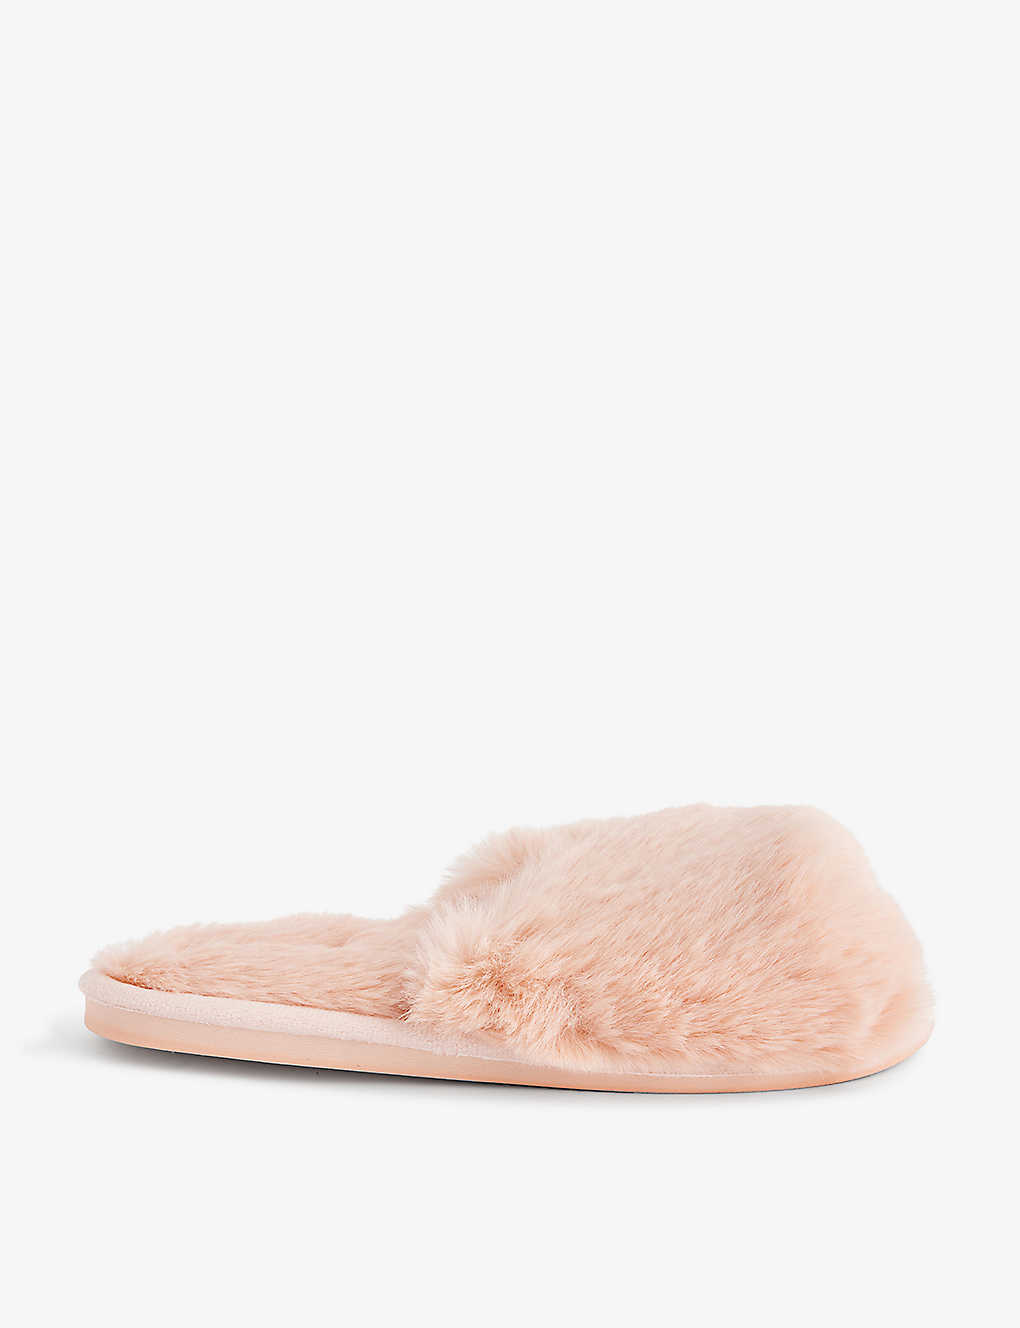 EBERJEY EBERJEY WOMENS ROSE CLOUD PLUSH RECYCLED-POLYESTER SLIPPERS